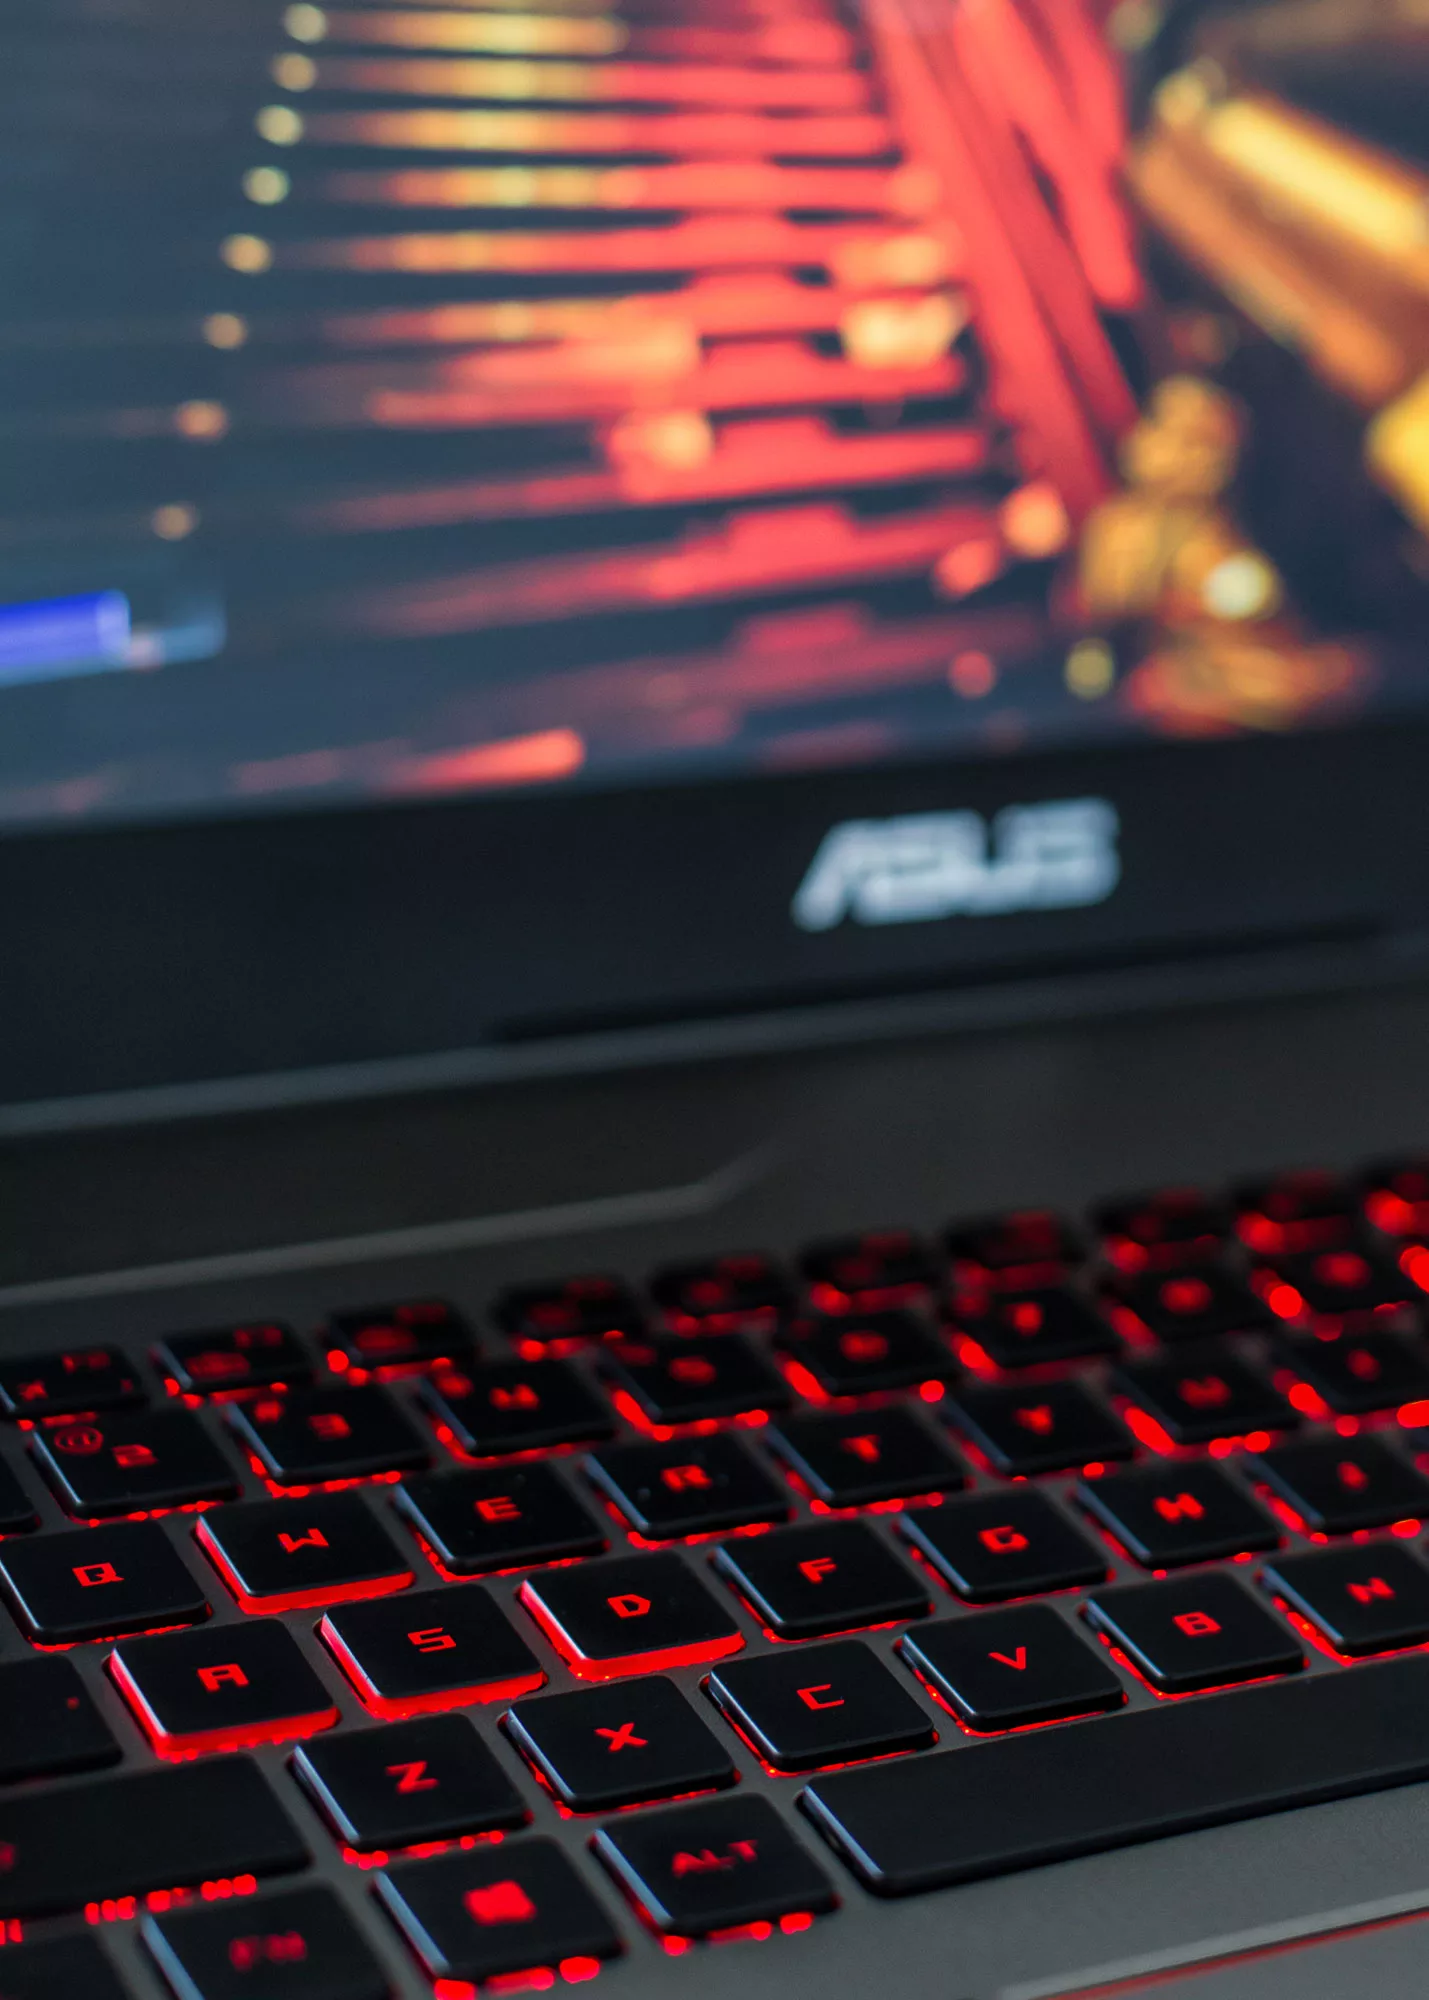 Gaming around the world with the ROG Strix GL502VS laptop | ROG - Republic  of Gamers Global